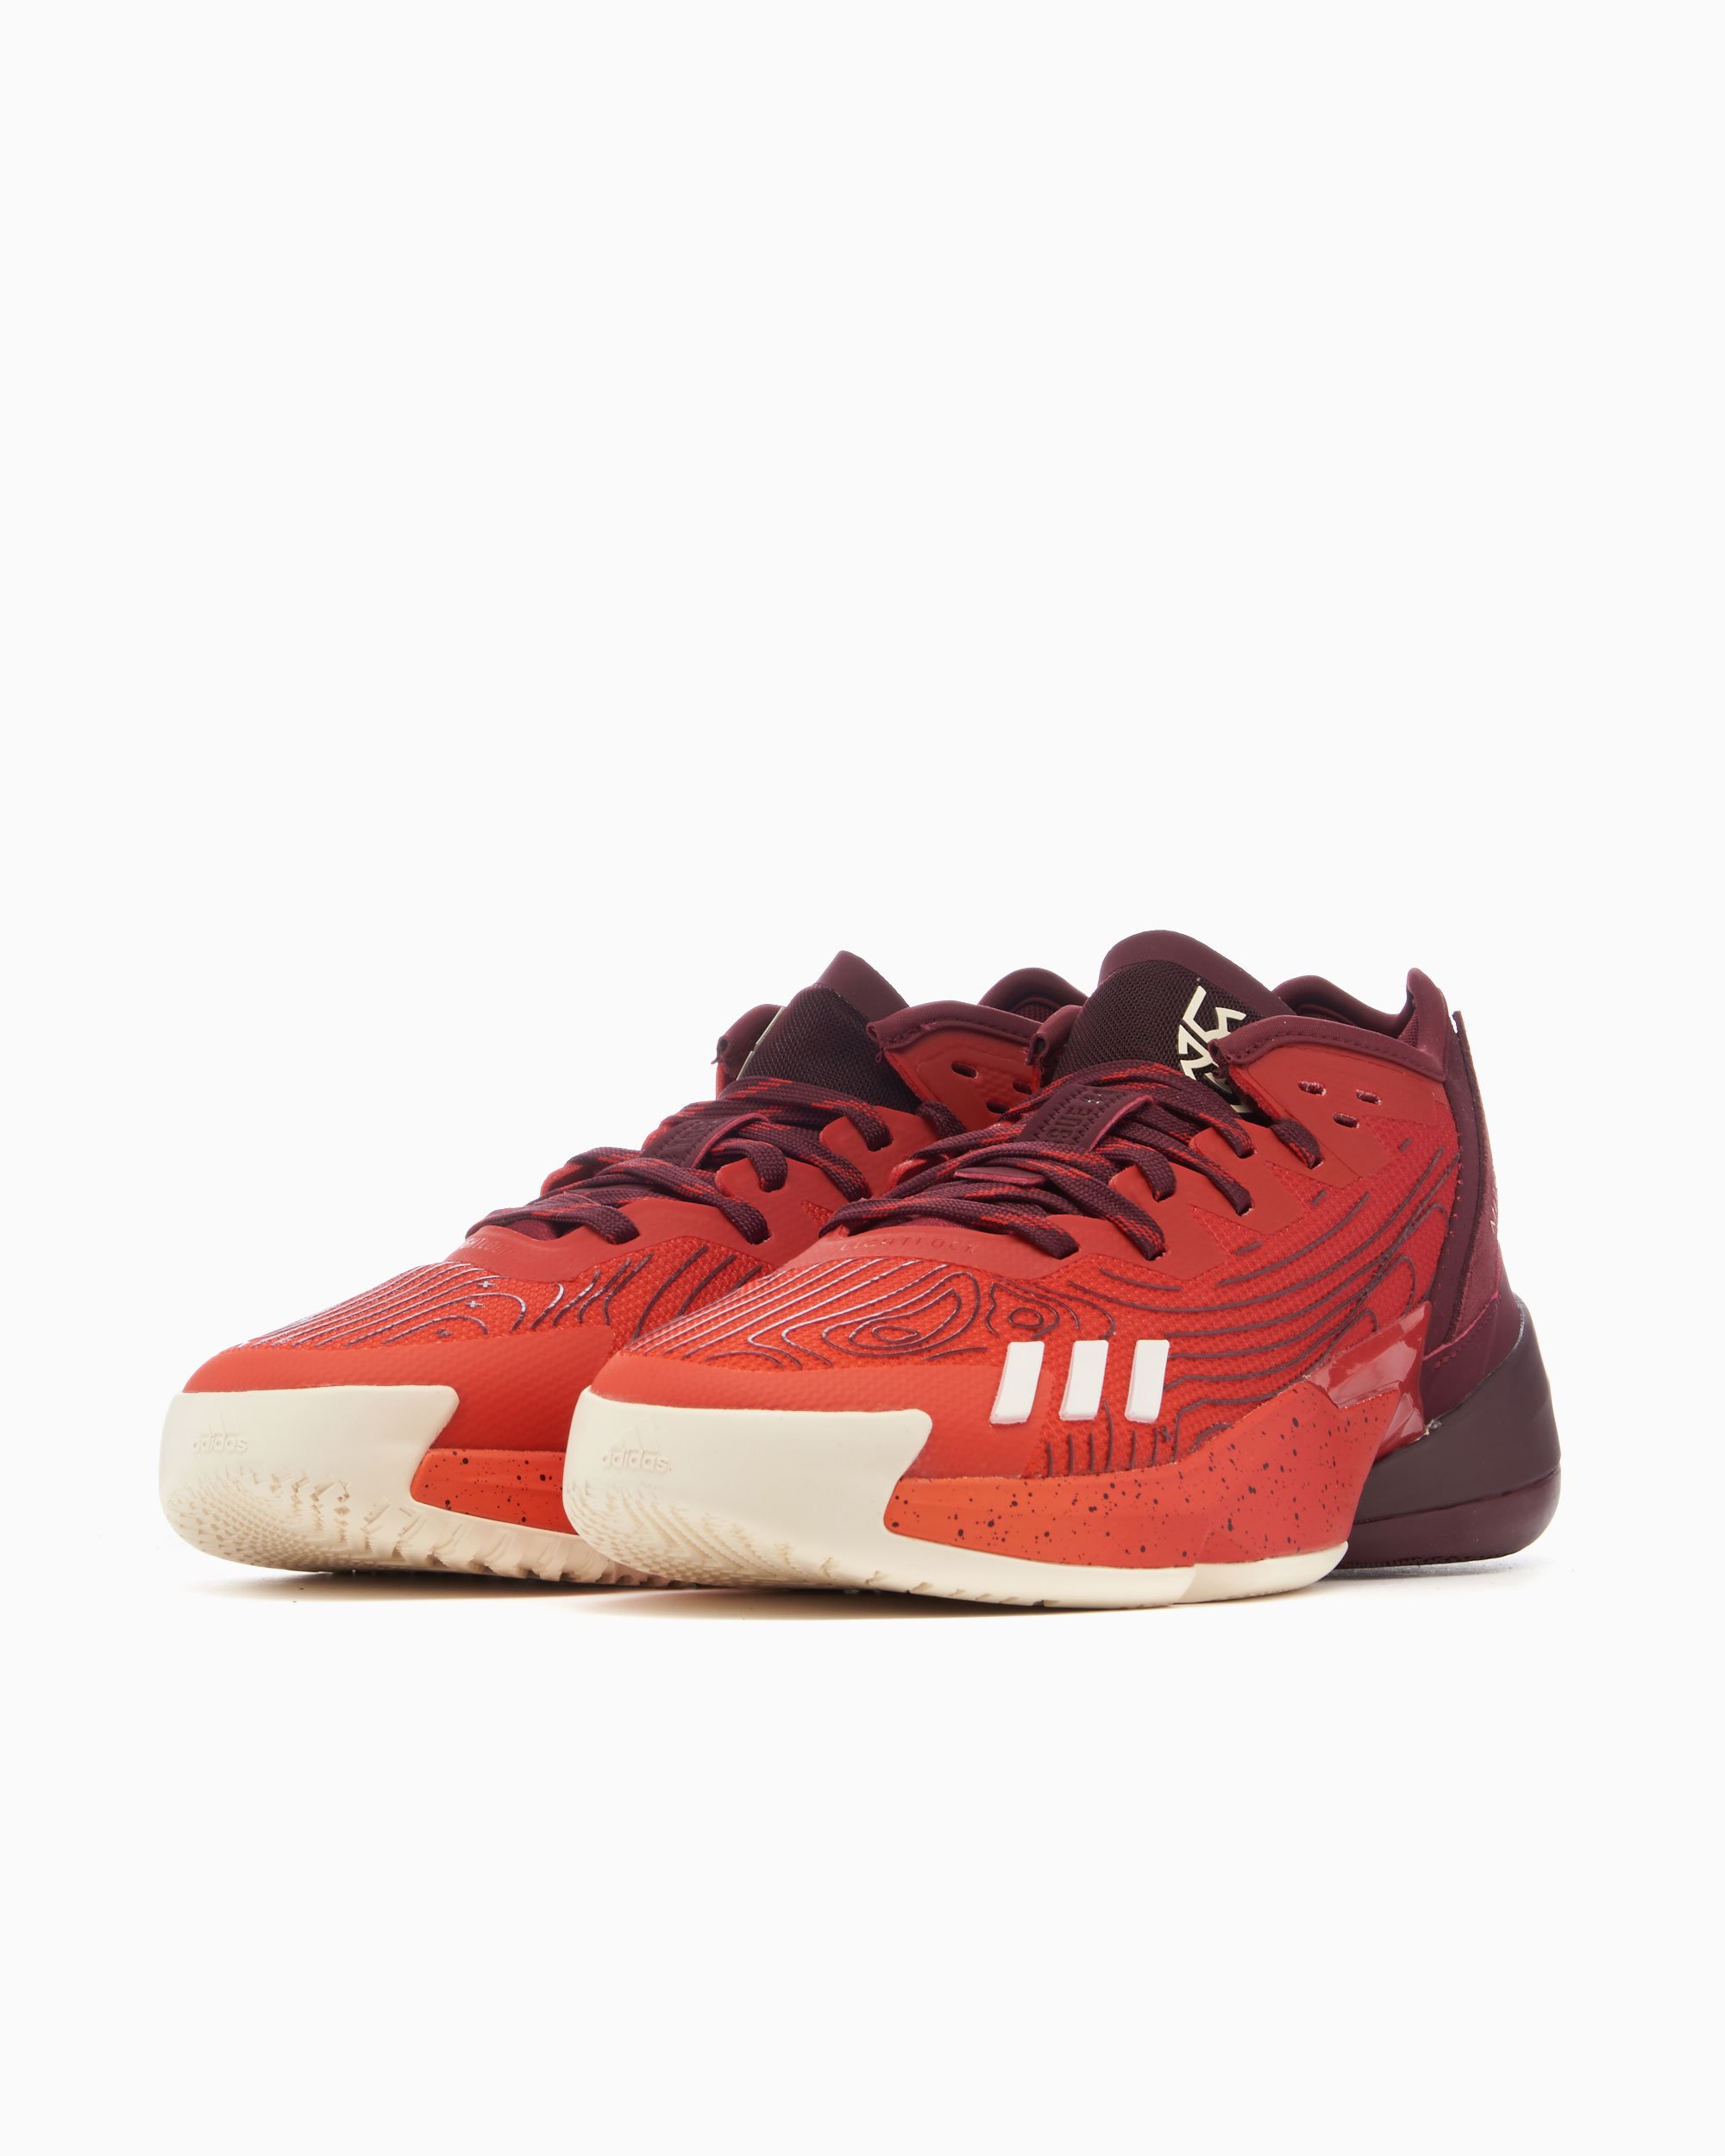 adidas Originals D.O.N. Issue 4 Red HR0725| Buy Online at FOOTDISTRICT